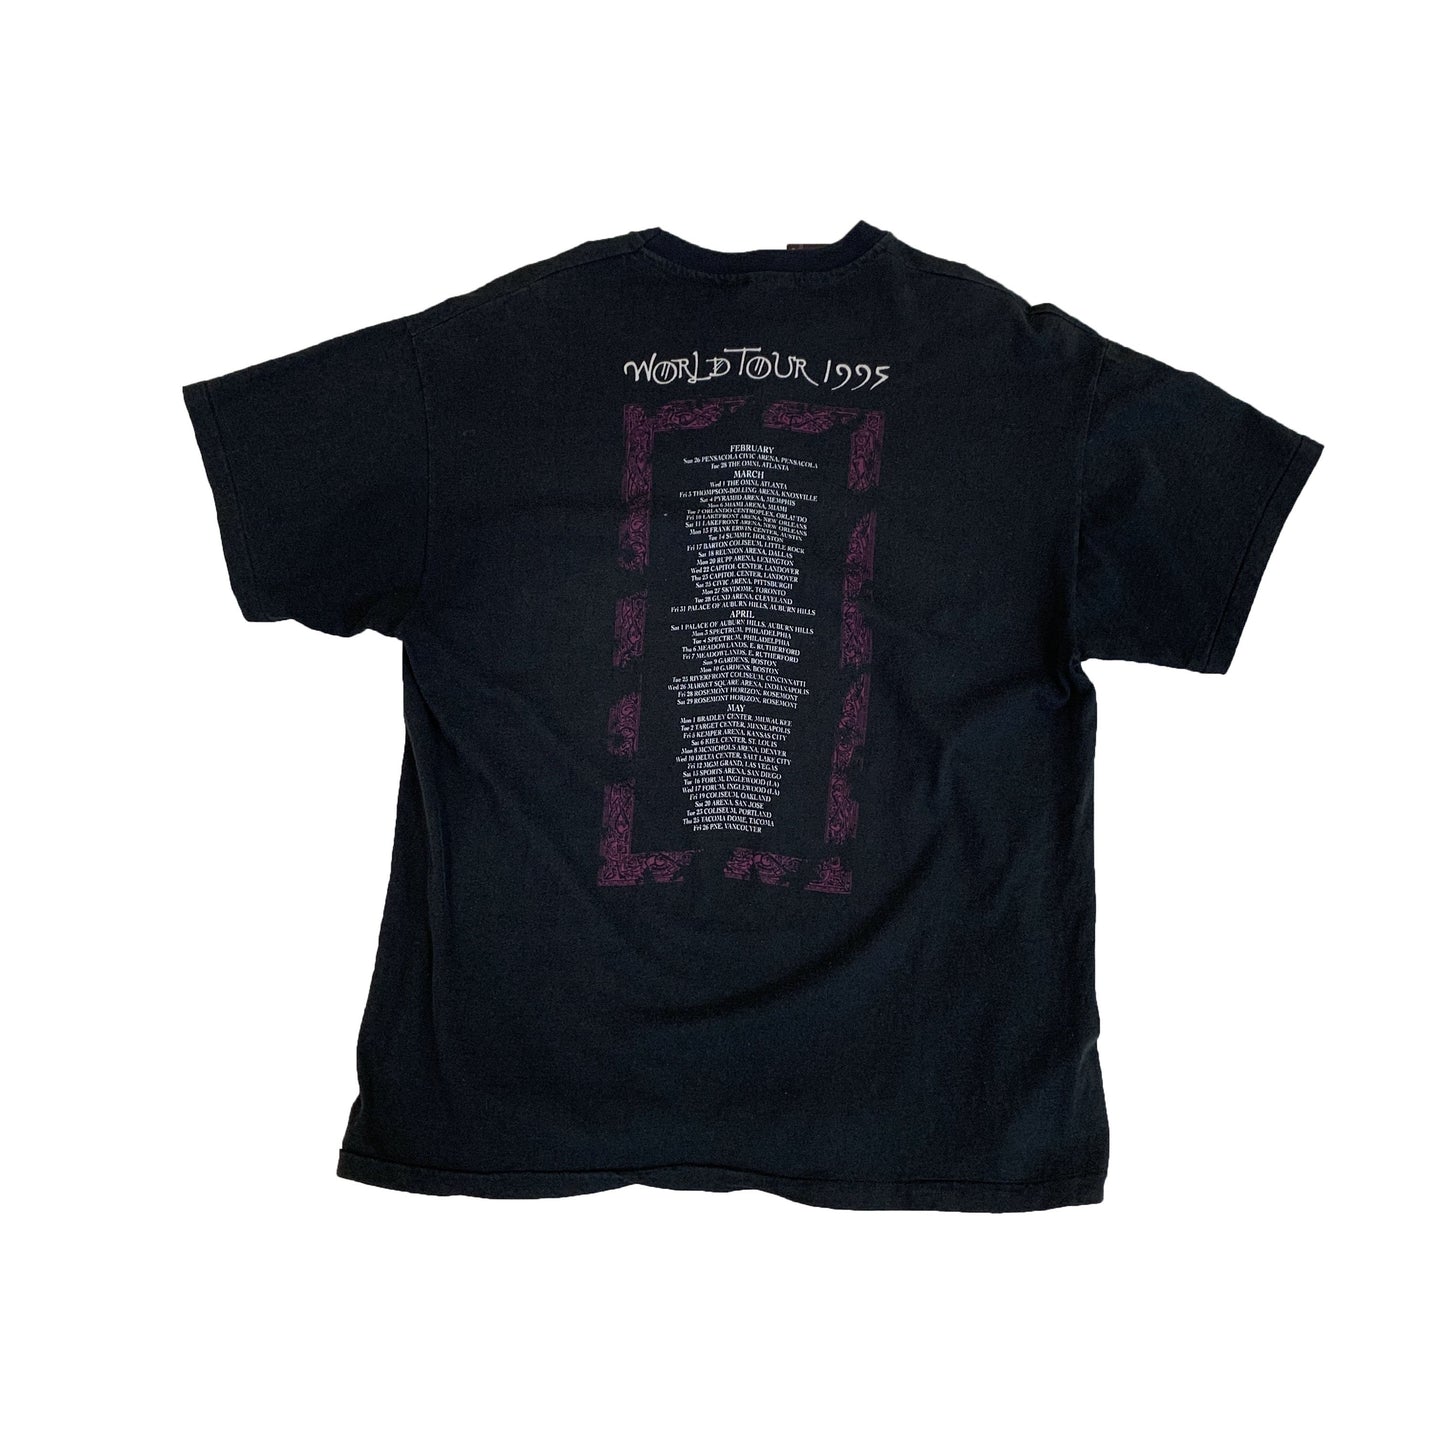 Jimmy Page 1995 Tour Tee